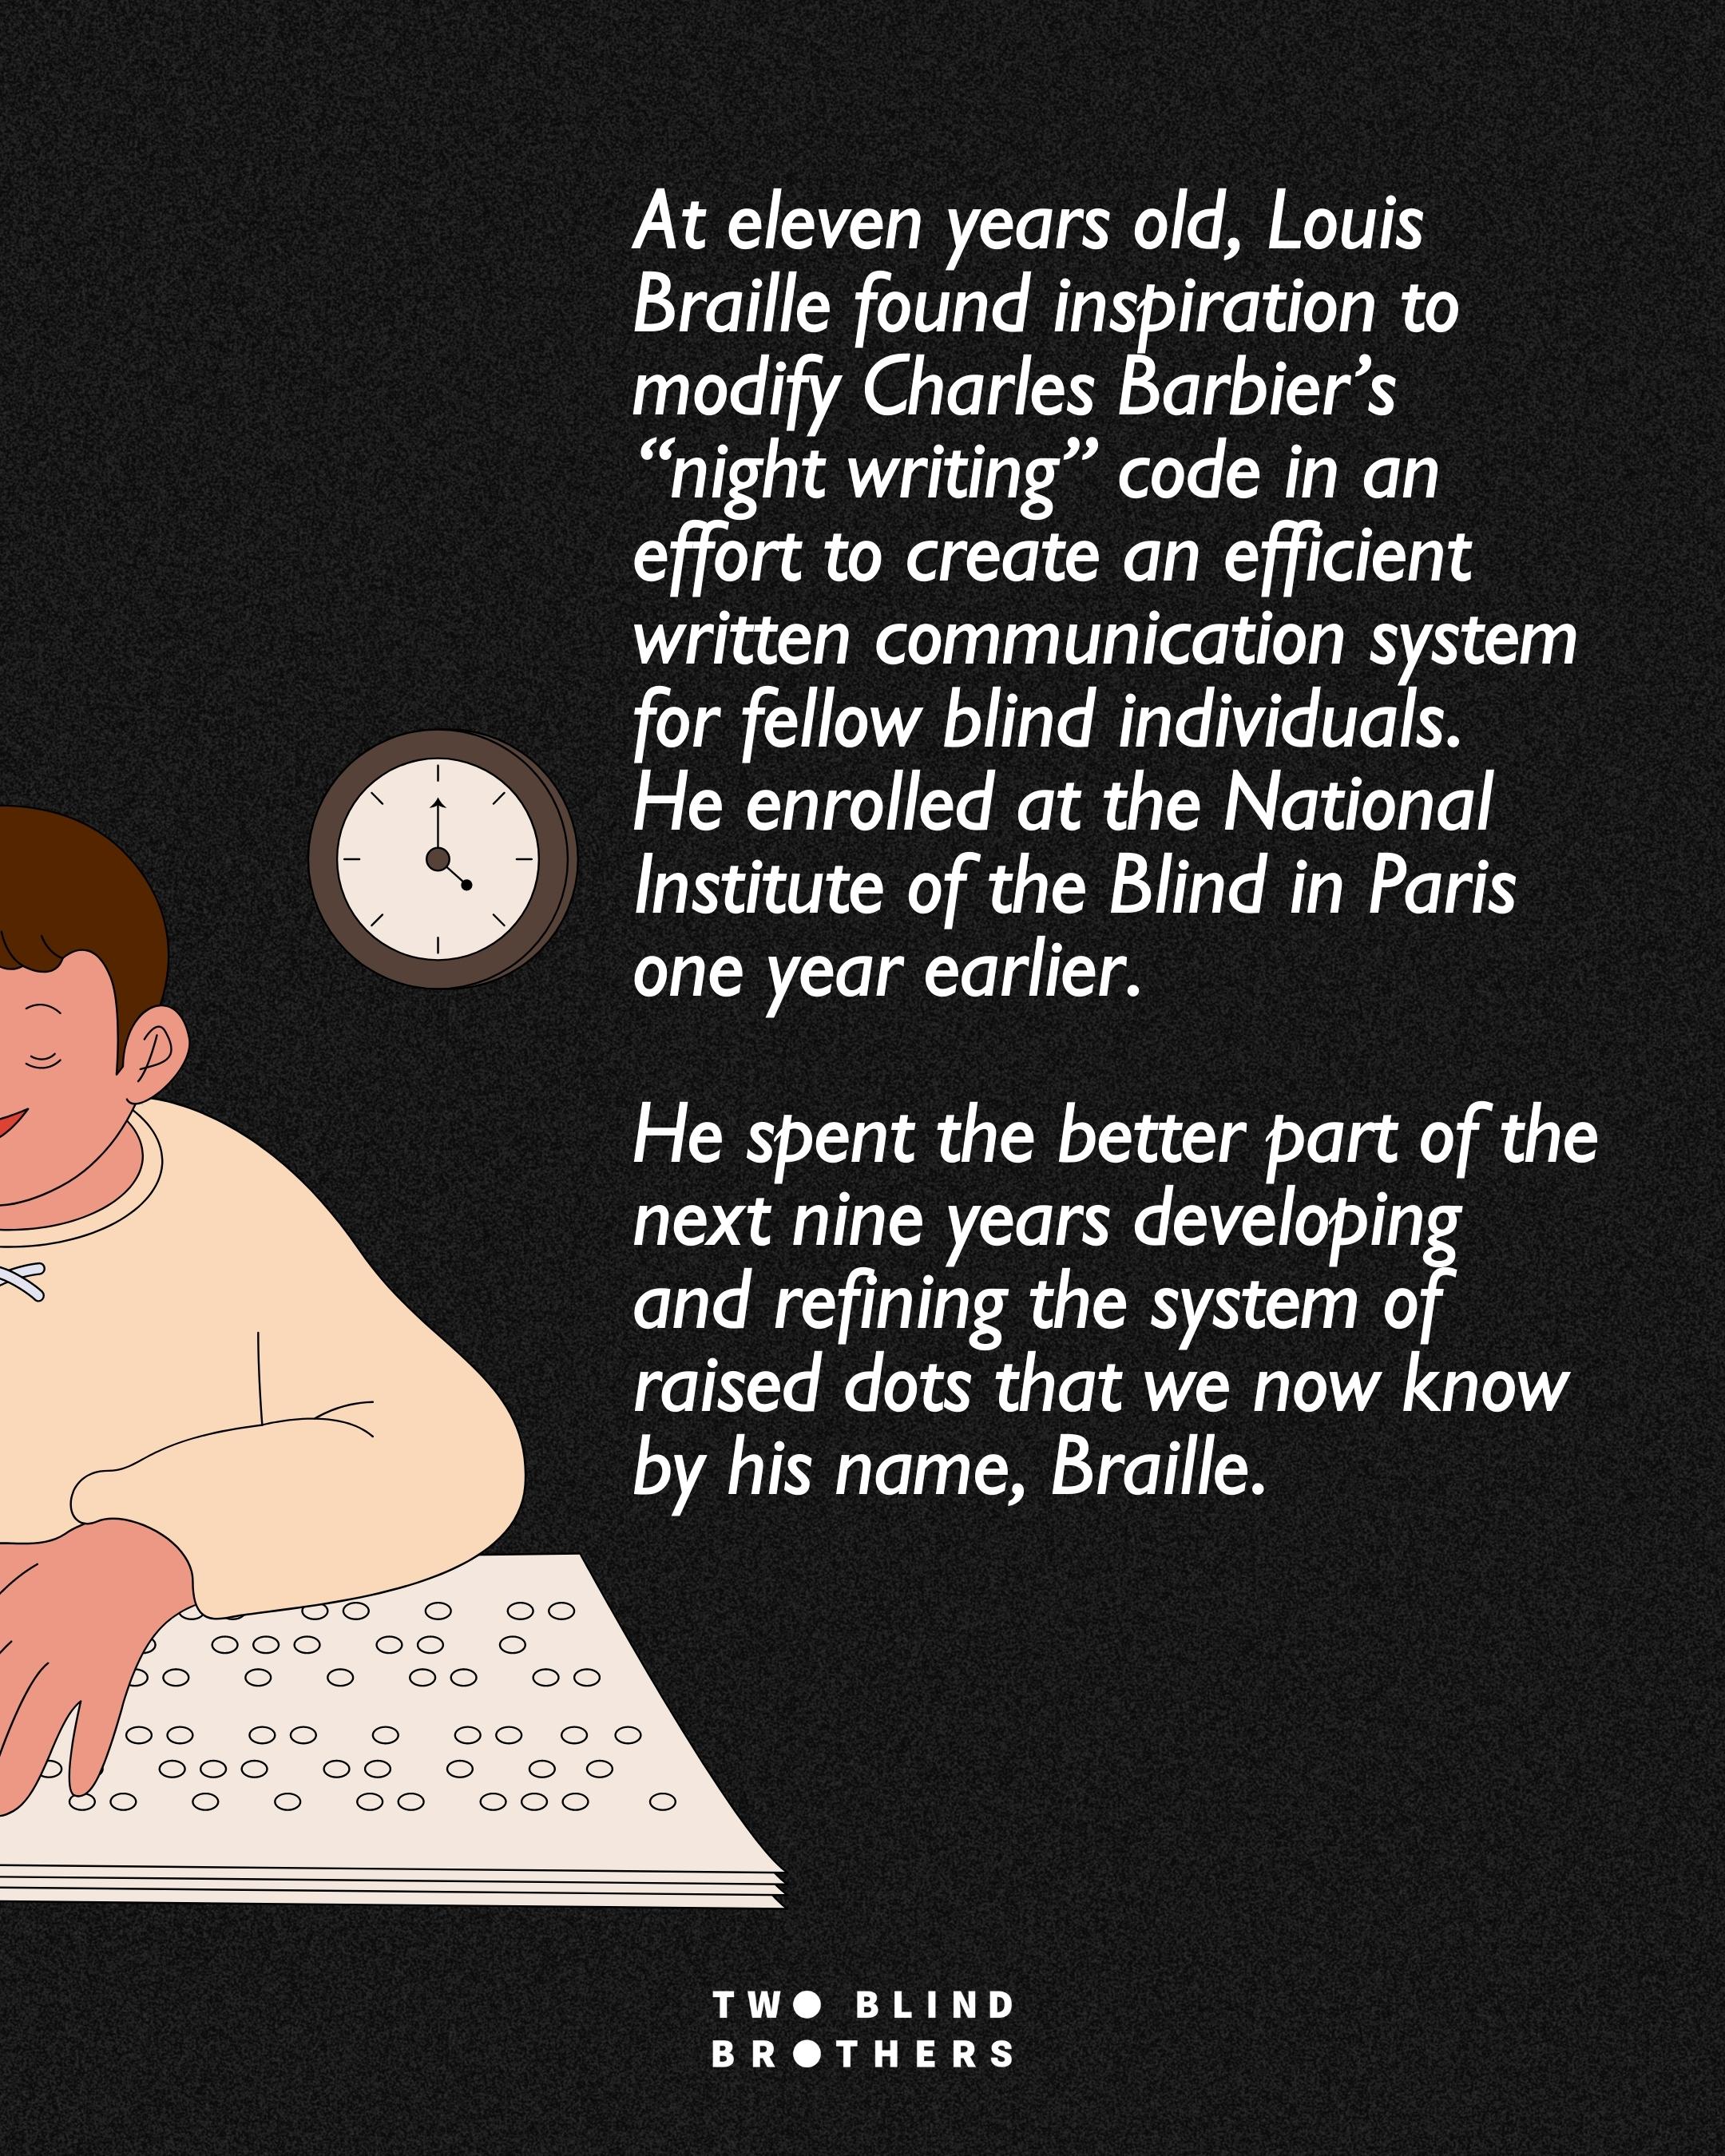 At eleven years old, Louis Braille found inspiration to modify Charles Barbier’s “night writing” code in an effort to create an efficient written communication system for fellow blind individuals. He enrolled at the National Institute of the Blind in Paris one year earlier. He spent the better part of the next nine years developing and refining the system of raised dots that we now know by his name, Braille.